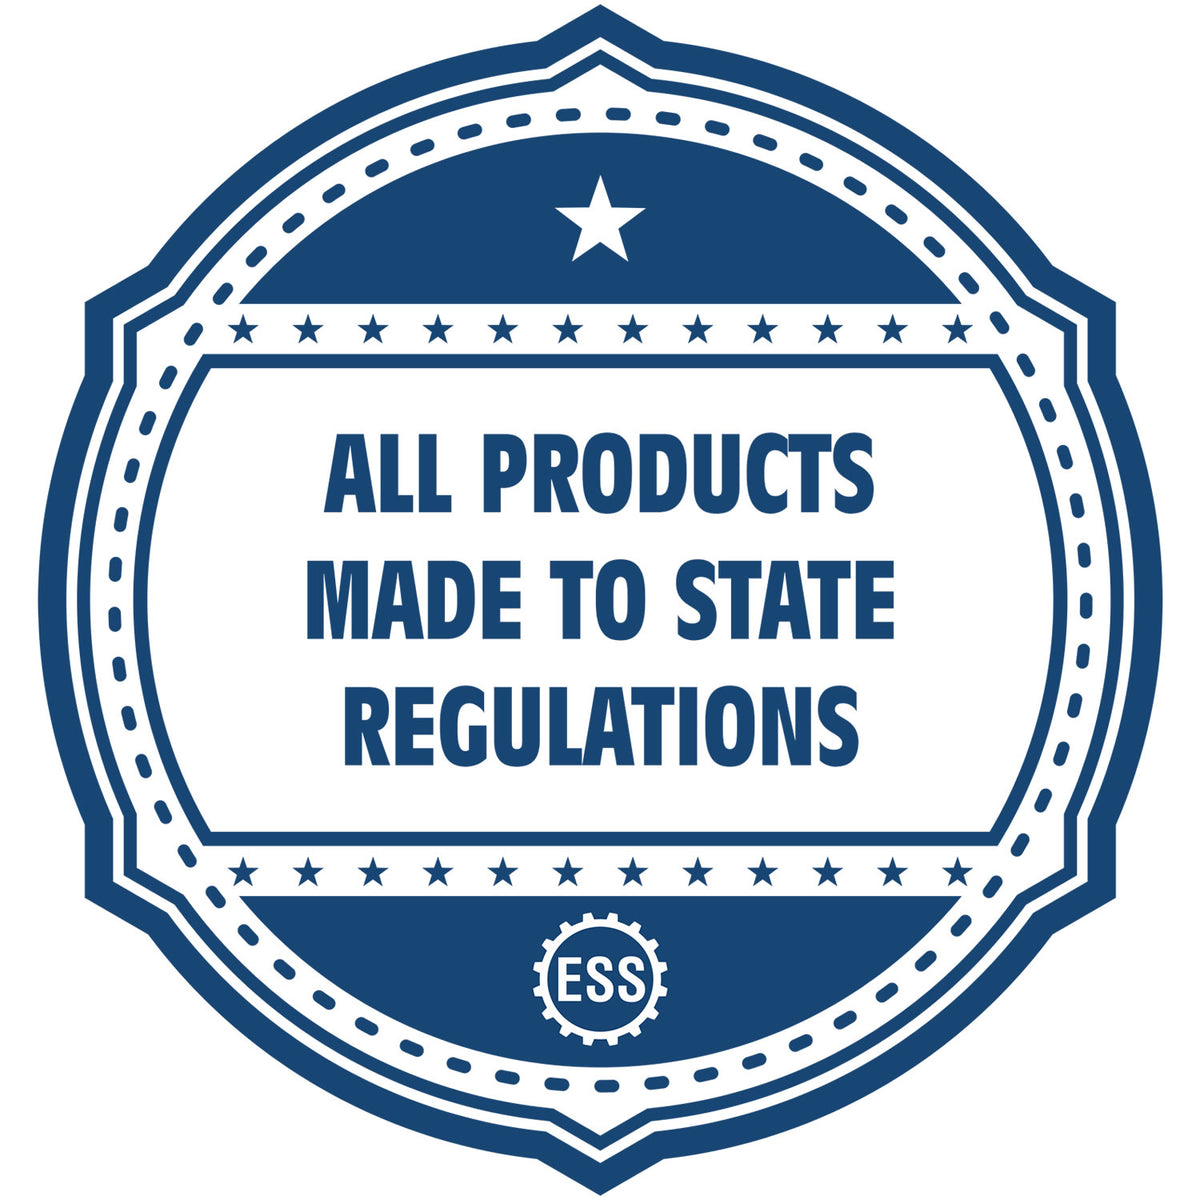 A blue icon or badge for the Hybrid Pennsylvania Architect Seal showing that this product is made in compliance with state regulations.